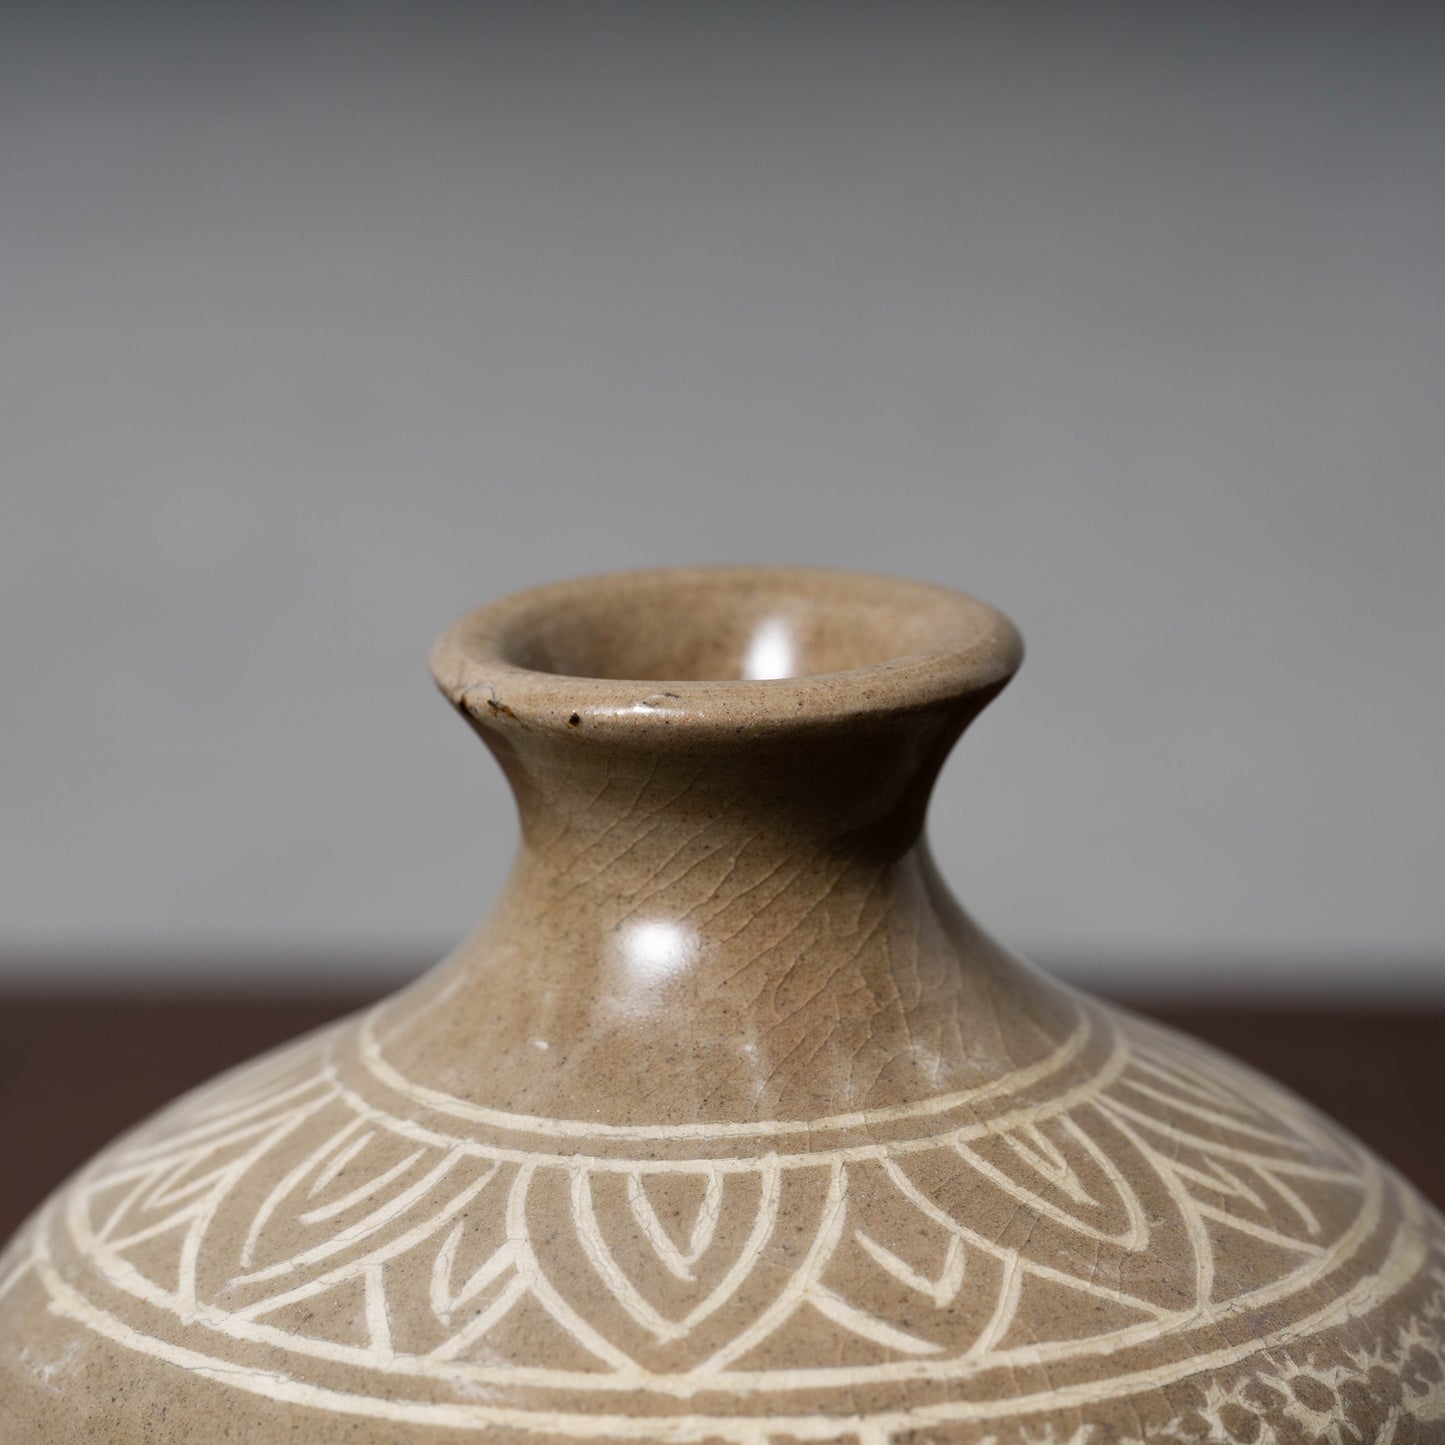 Joseon Dynasty Celadon Bottle with Inlaid Willow and Flower Design